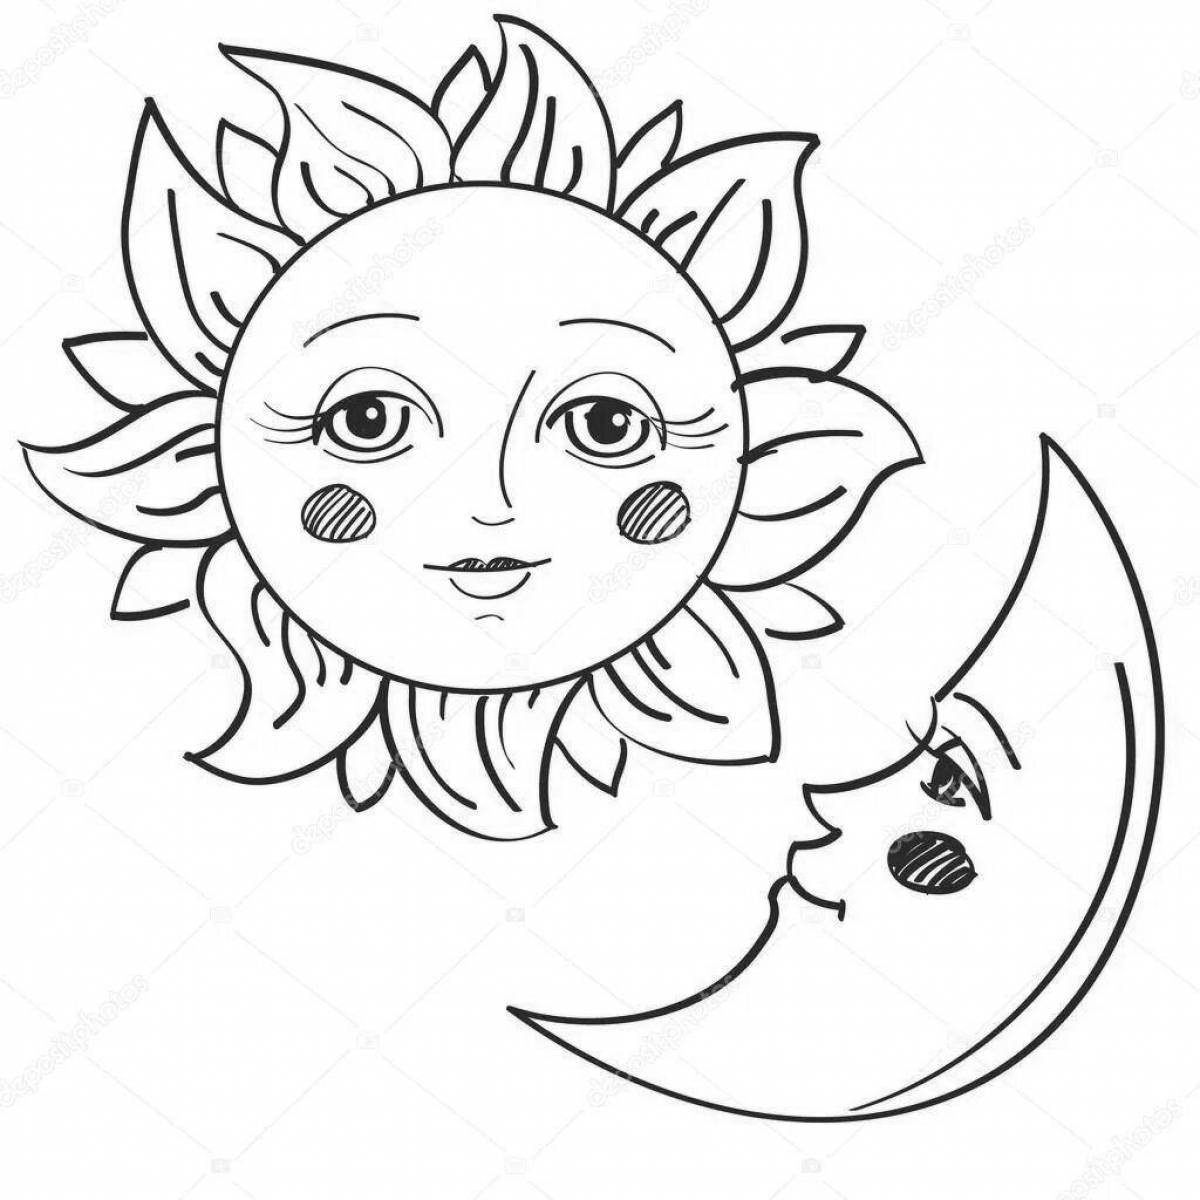 Playful moon and sun coloring for kids